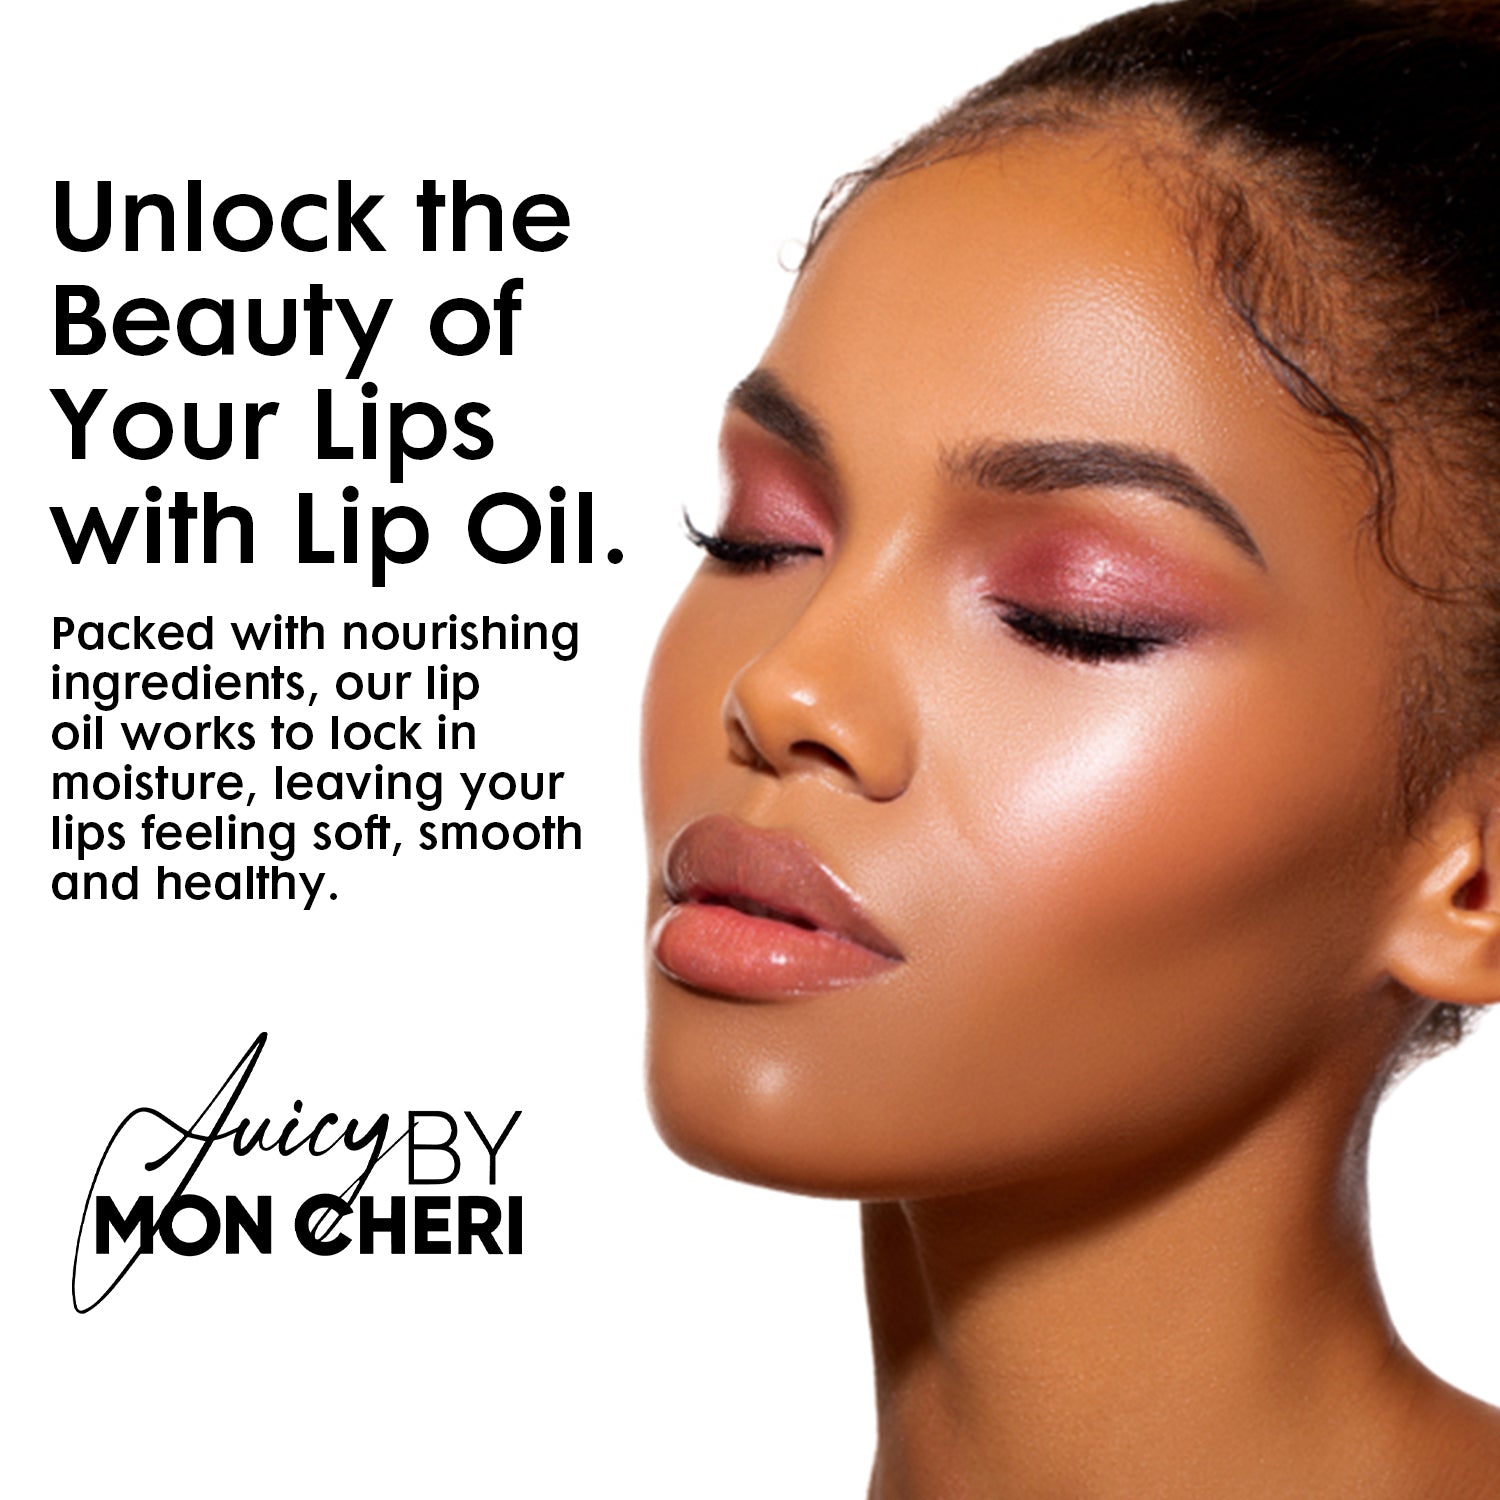 Revitalize Your Lips with Juicy By Mon Cheri Lip Oil - The Ultimate Solution for Moisturized, Shiny, and Healed Lips!